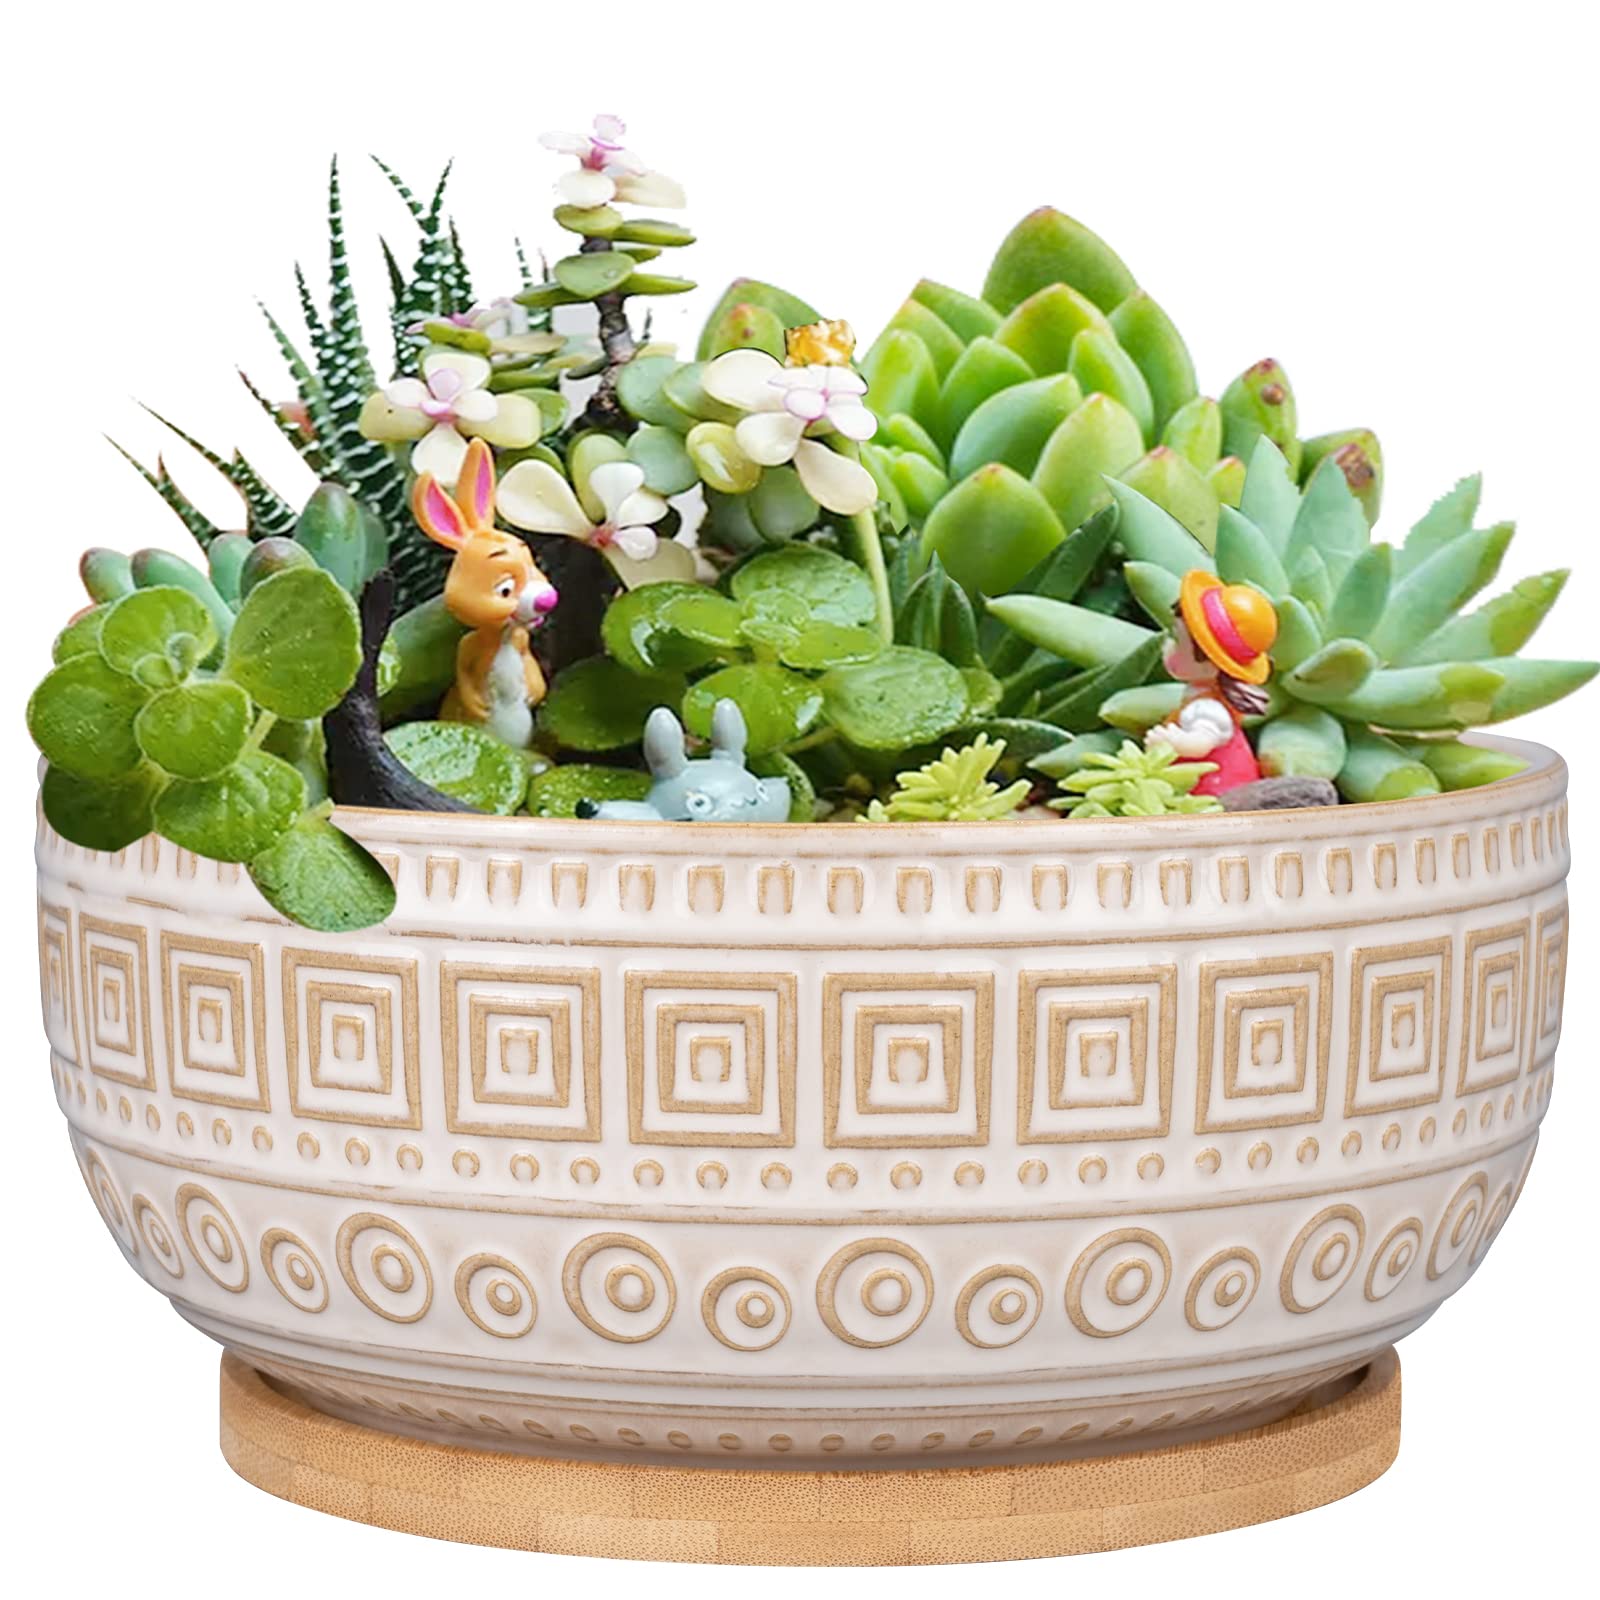 G EPGardening 8 Inch Ceramic Succulent Planter Pots for Indoor Plants Round Shallow Bonsai Planter Pot with Drainage and Bamboo Saucer White